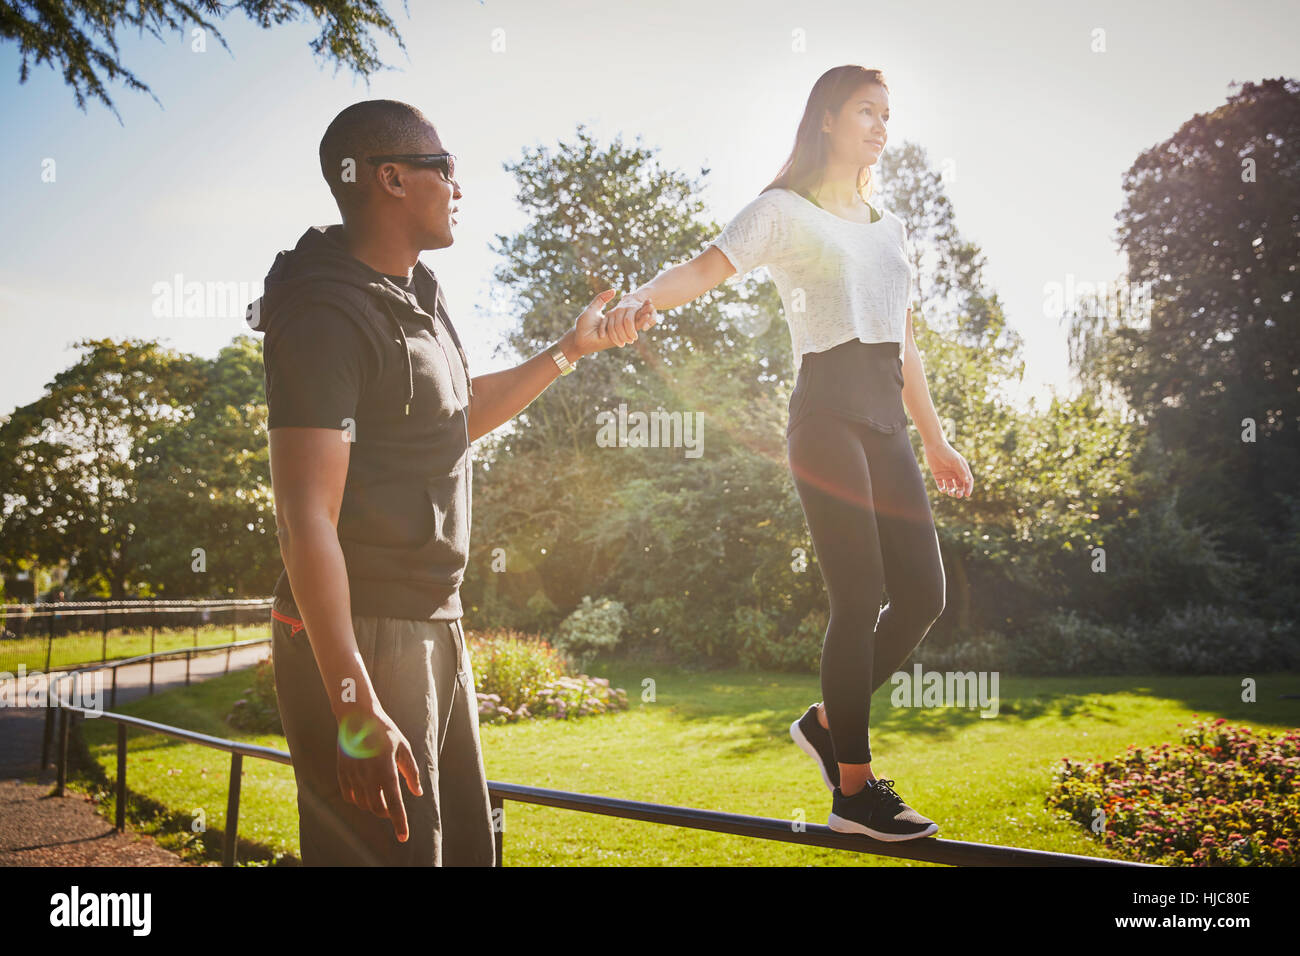 Woman holding hands with  personal trainer walking on park fence Stock Photo